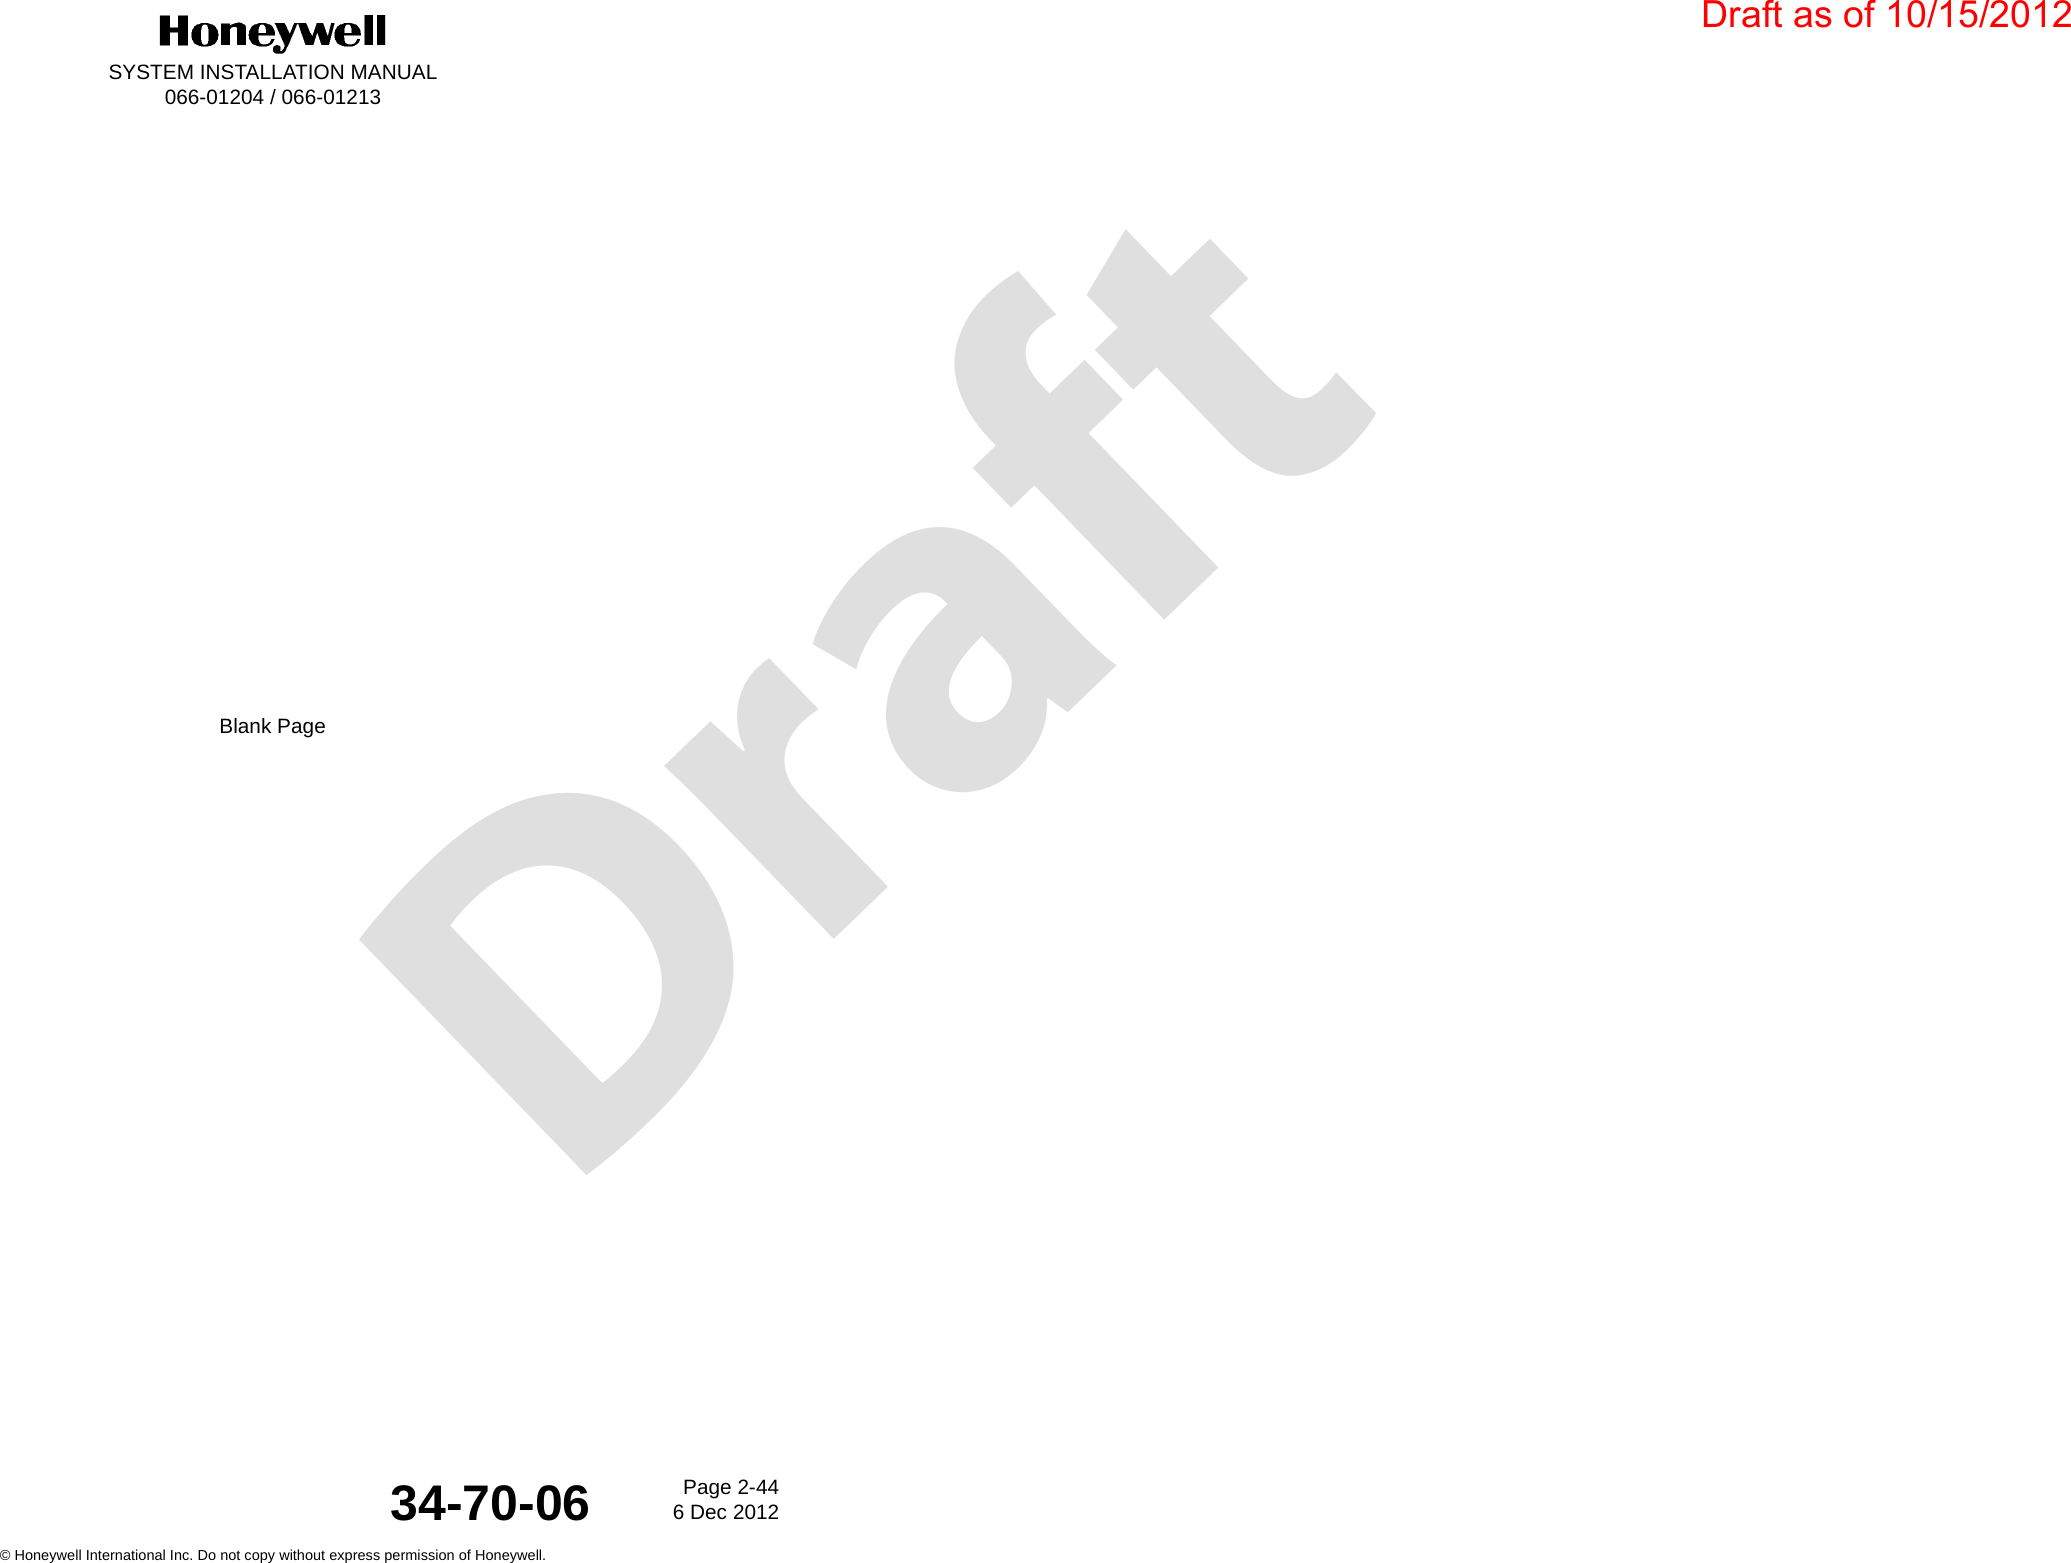 DraftSYSTEM INSTALLATION MANUAL066-01204 / 066-01213Page 2-446 Dec 2012© Honeywell International Inc. Do not copy without express permission of Honeywell.34-70-06Blank PageDraft as of 10/15/2012